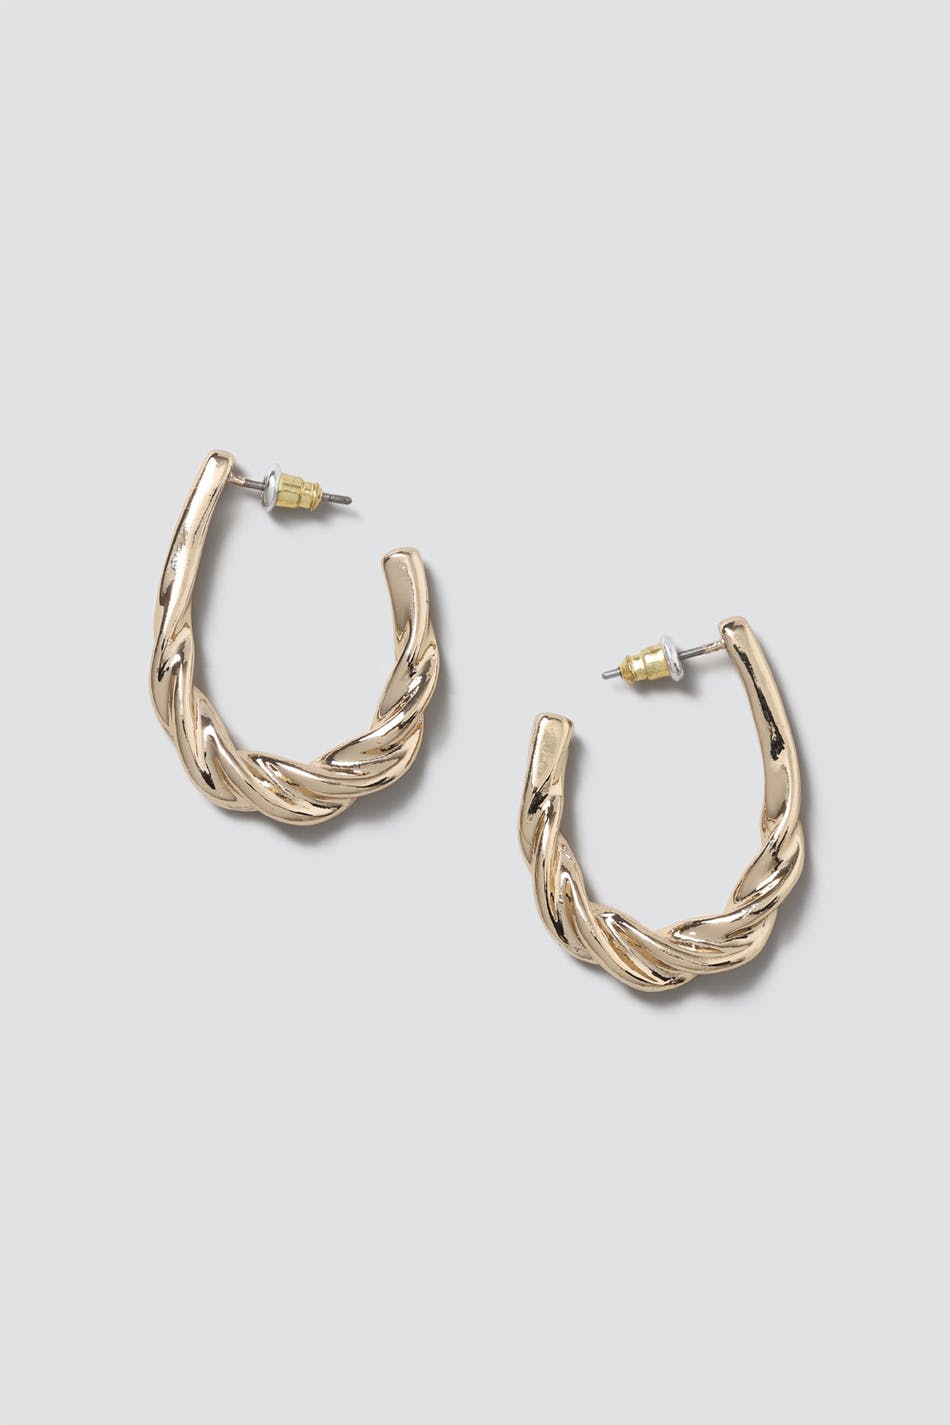 Gina Tricot Half Twist Gold Earrings one size  Gold